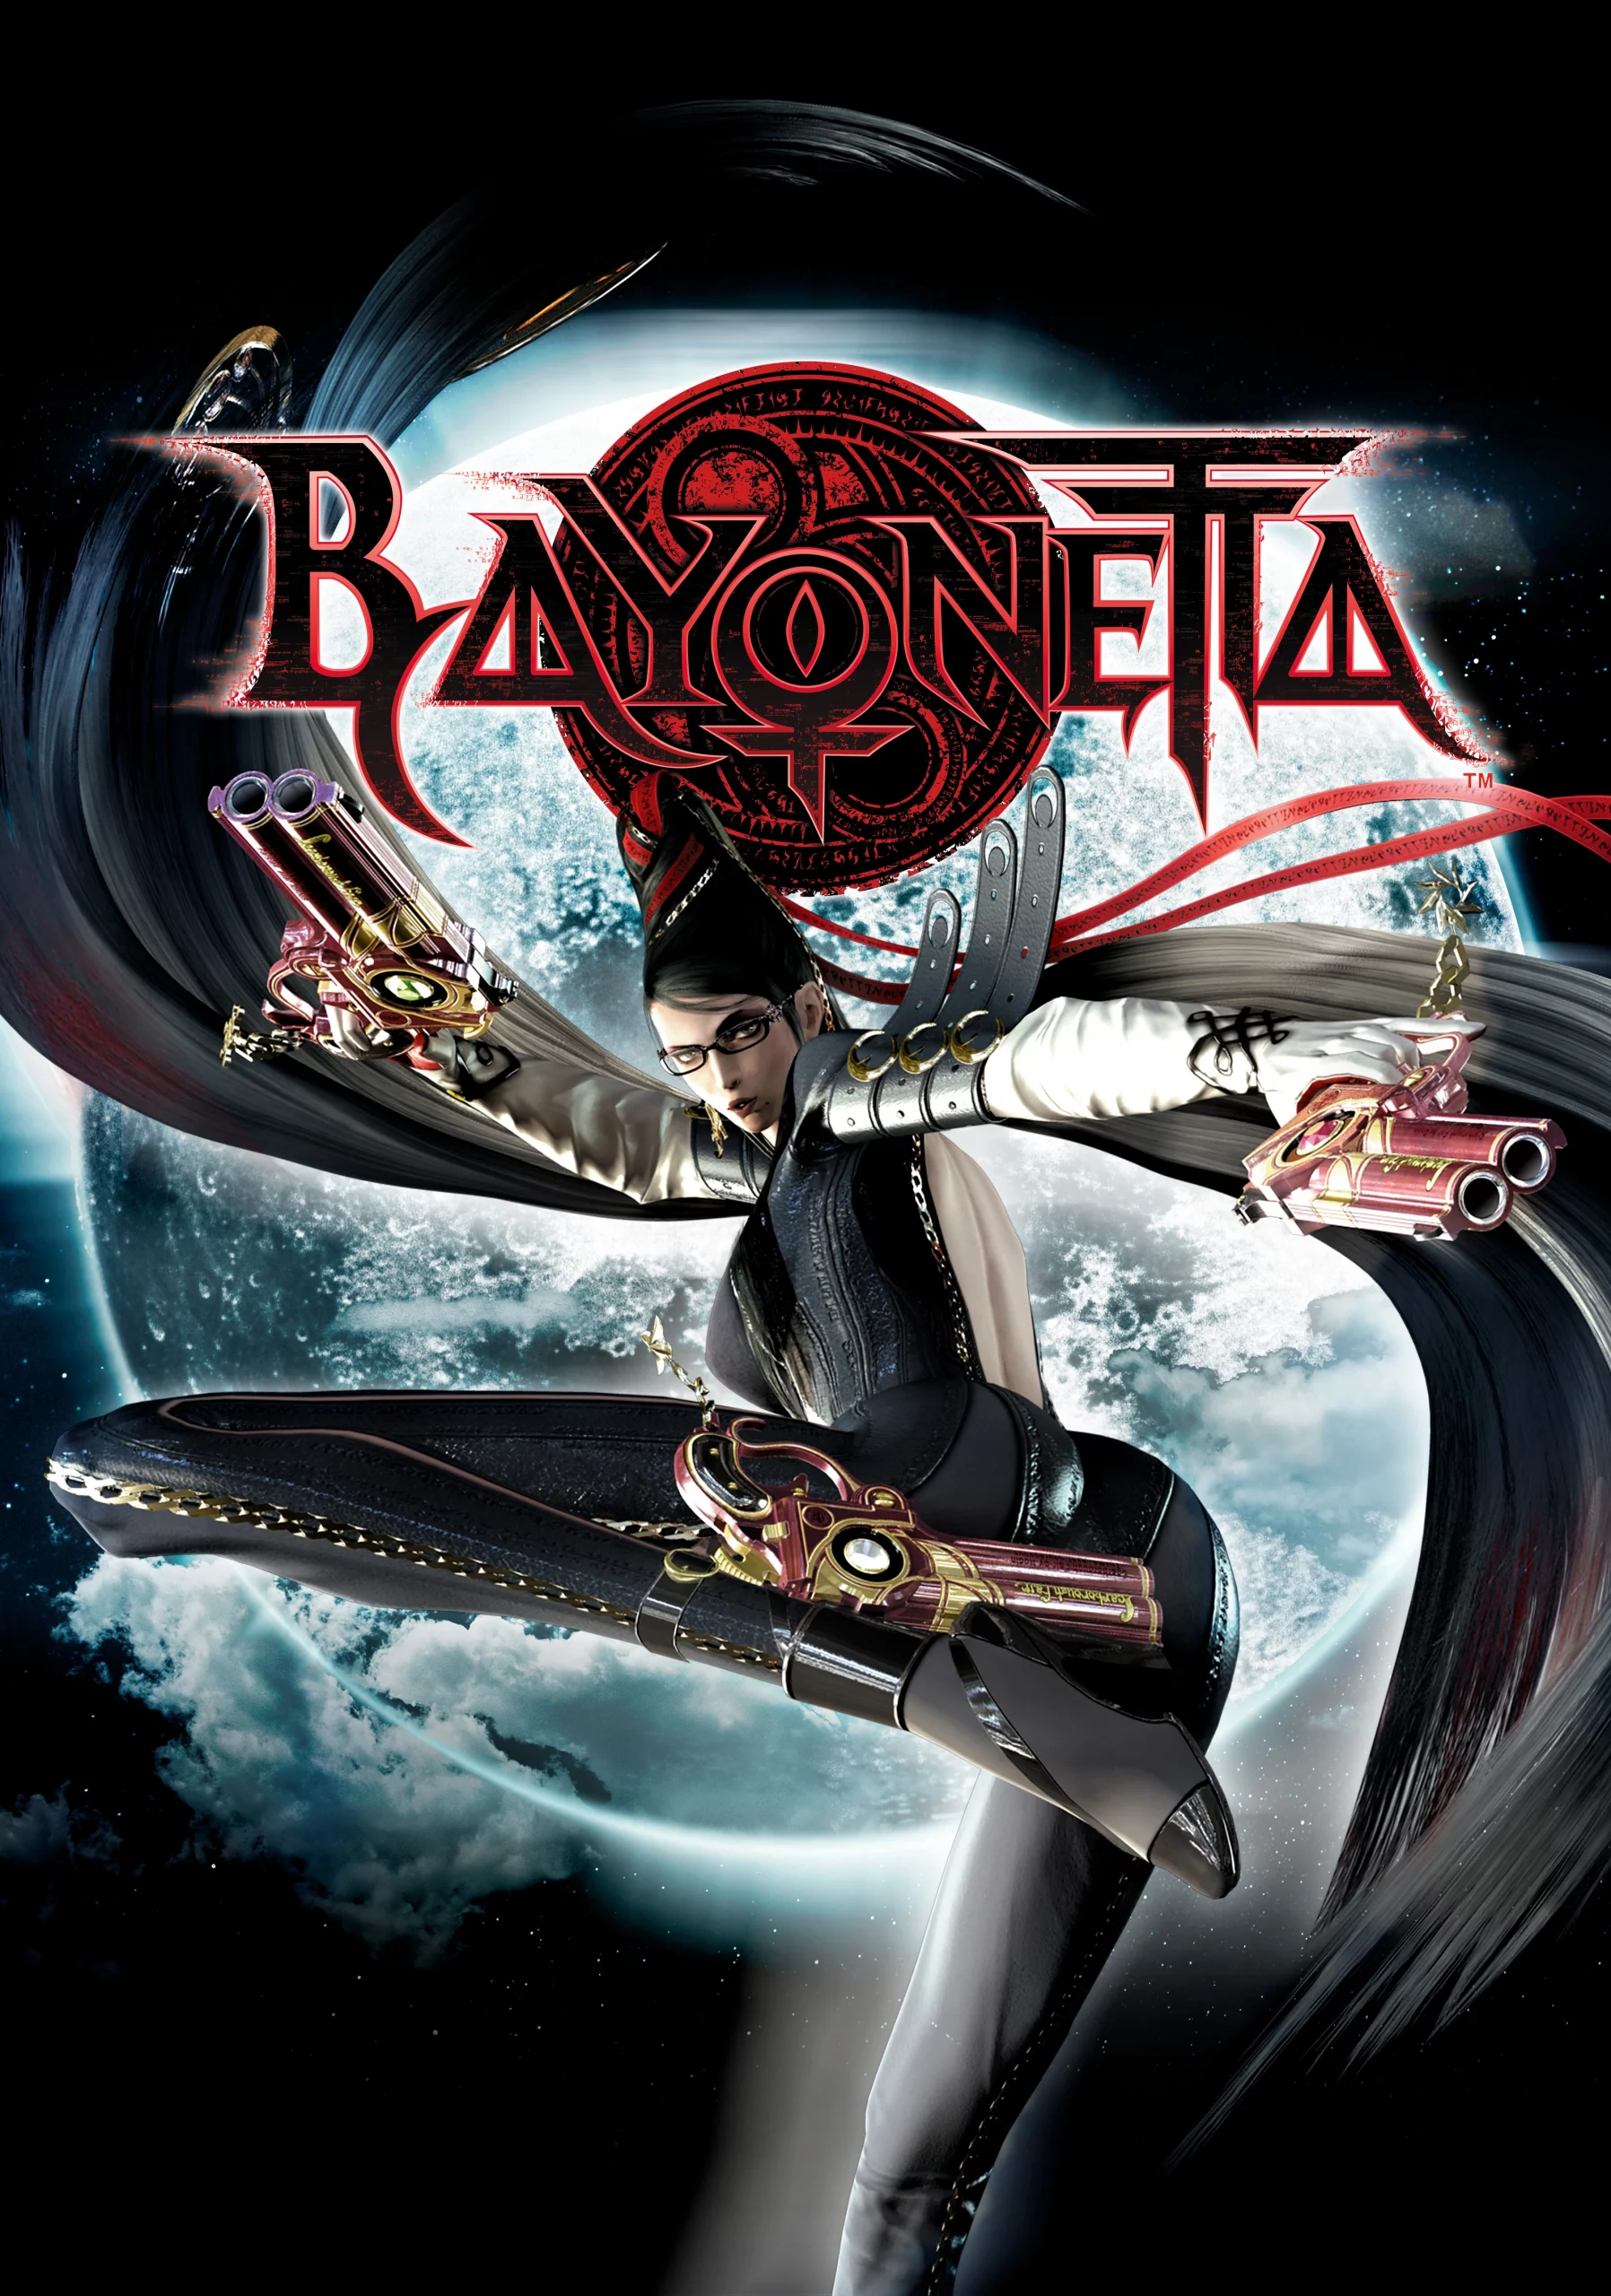 Bayonetta pc free download 7z file extractor download windows 7